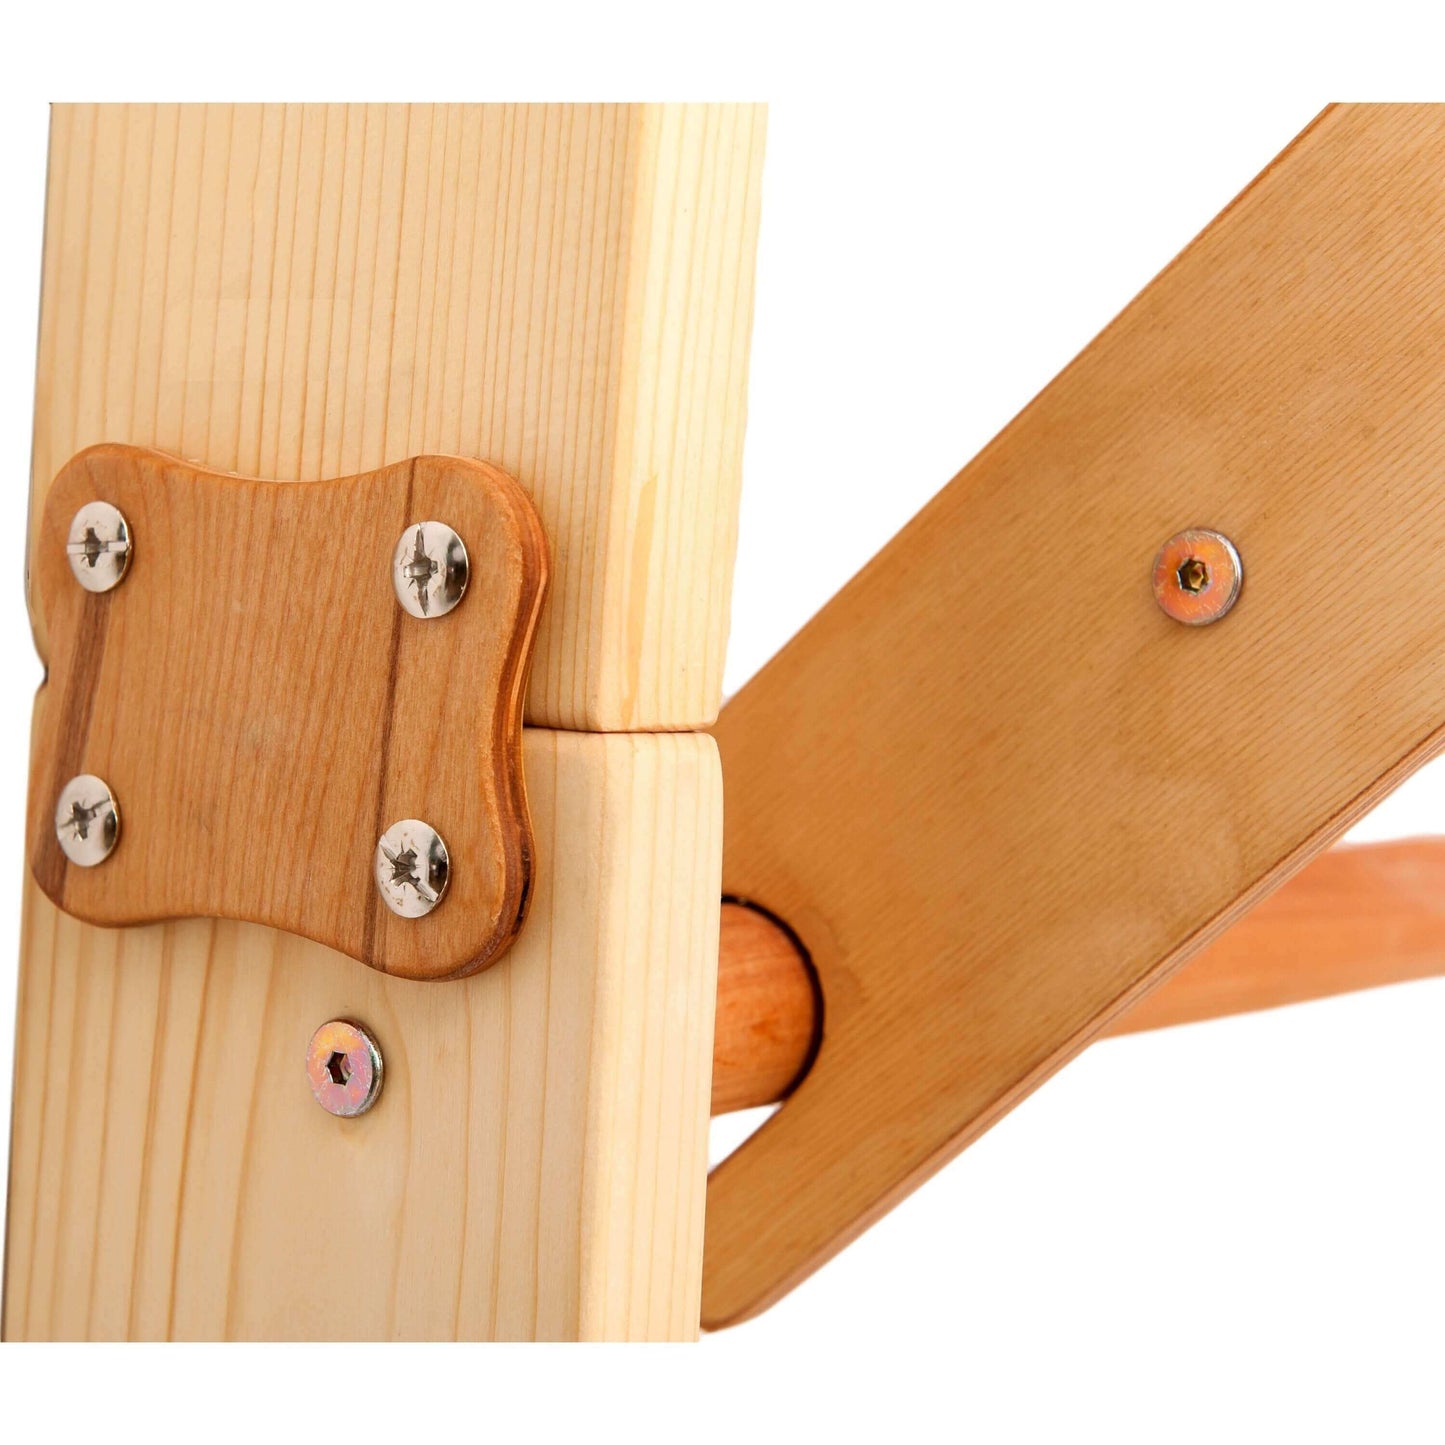 Climbing wall SPORT3 for children &amp; teenagers, untreated wood